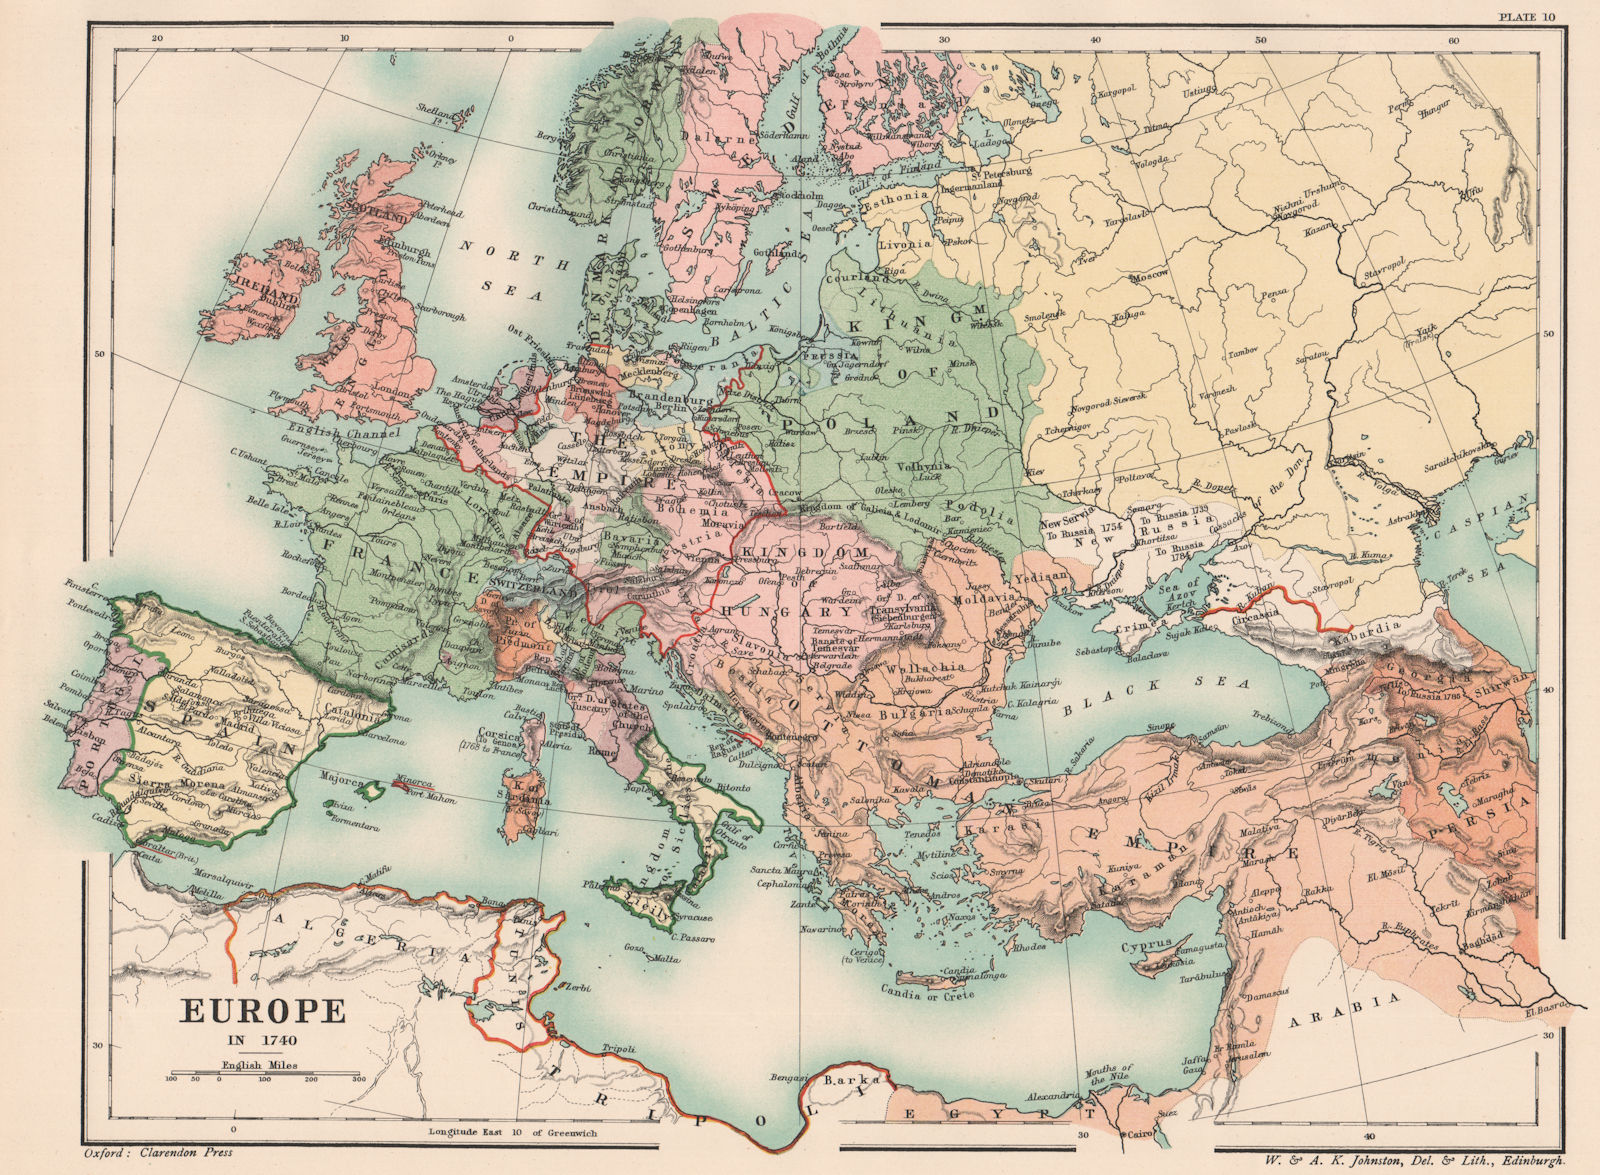 EUROPE IN 1740. France England Holy Roman Empire Spain Ottomans &c 1902 map